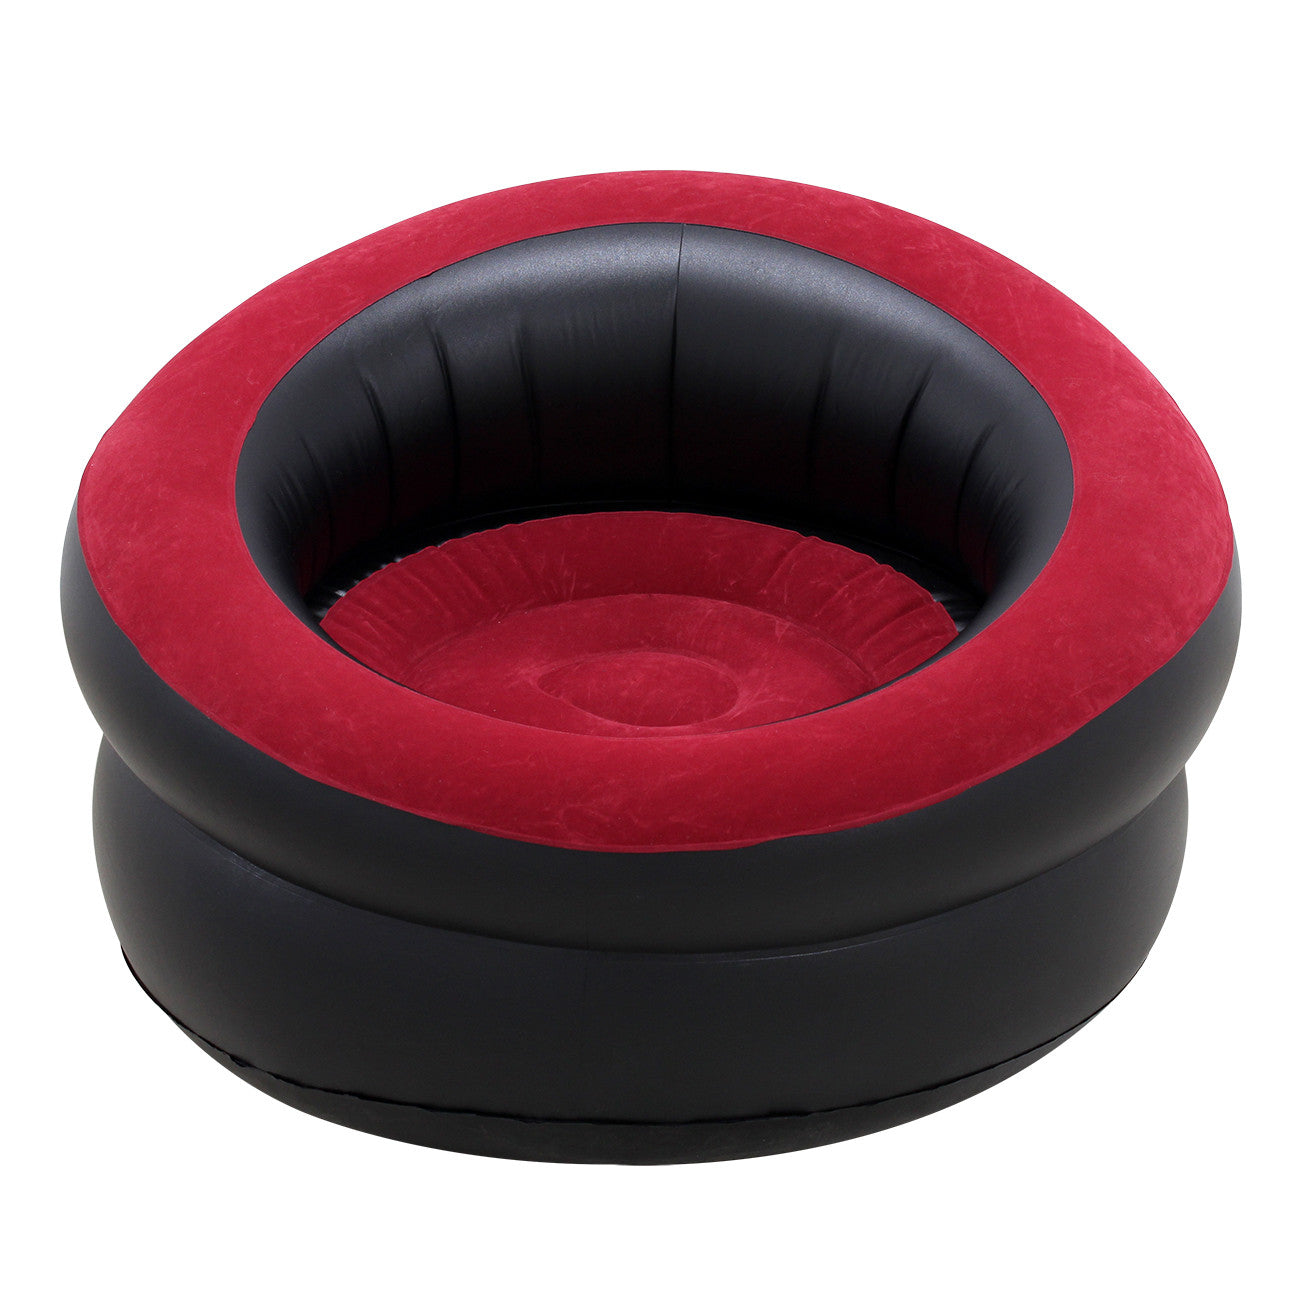 Flocked Inflatable Movie Chair